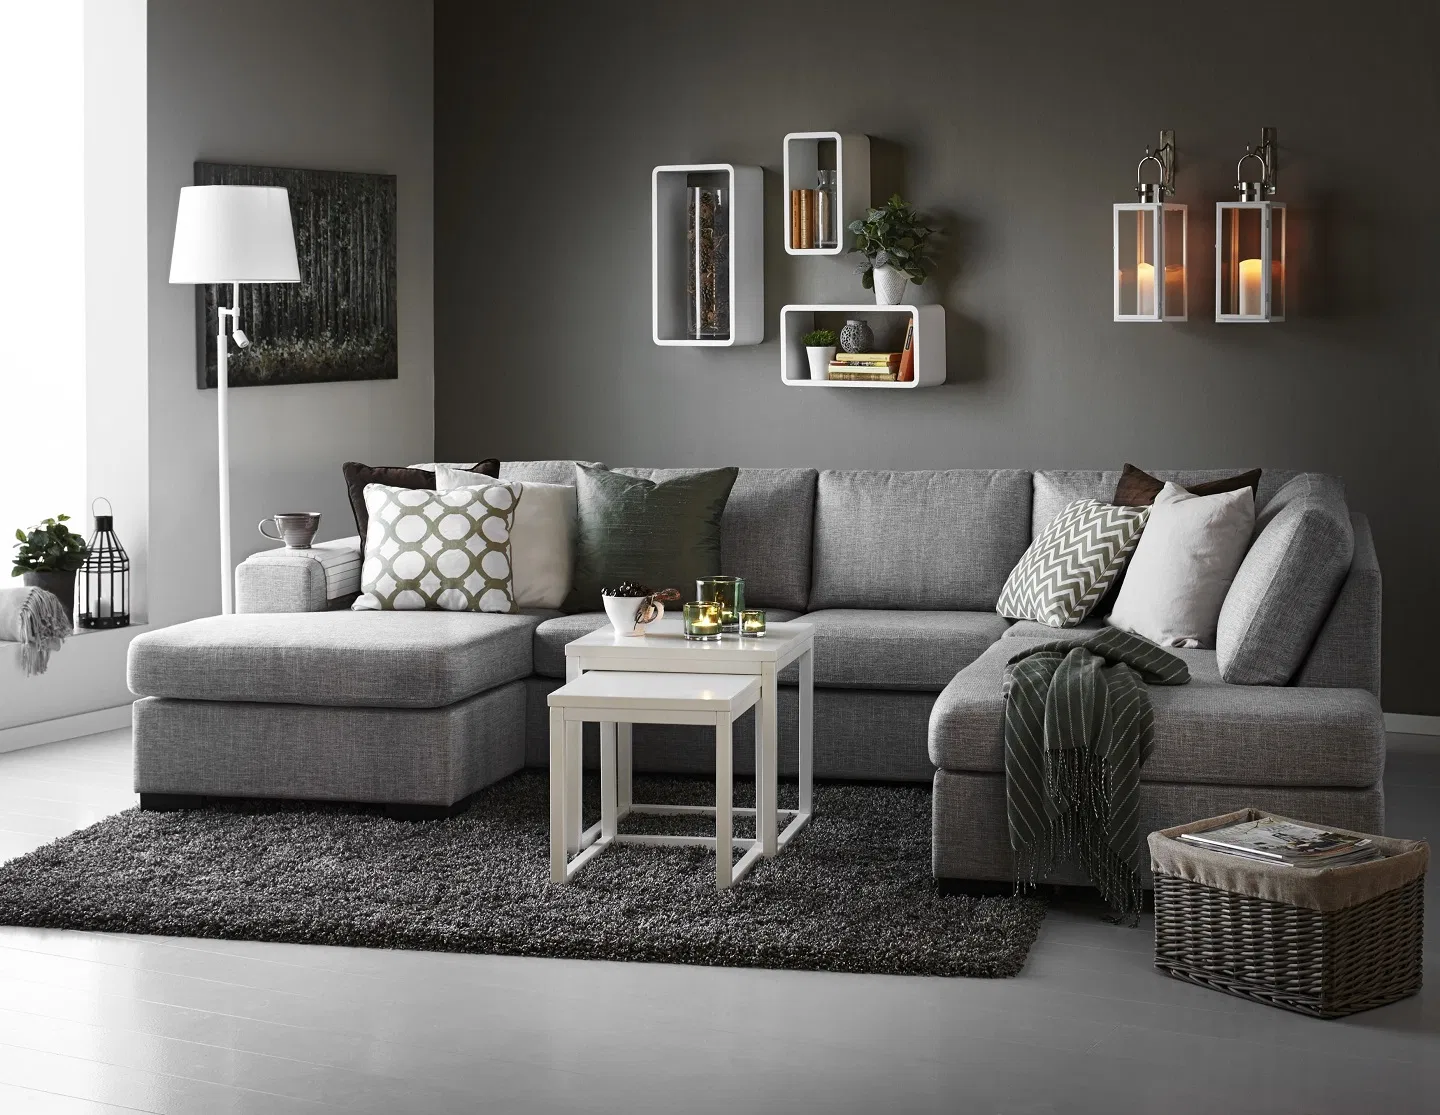 The Warm Embrace: Incorporating Warm Gray Tones